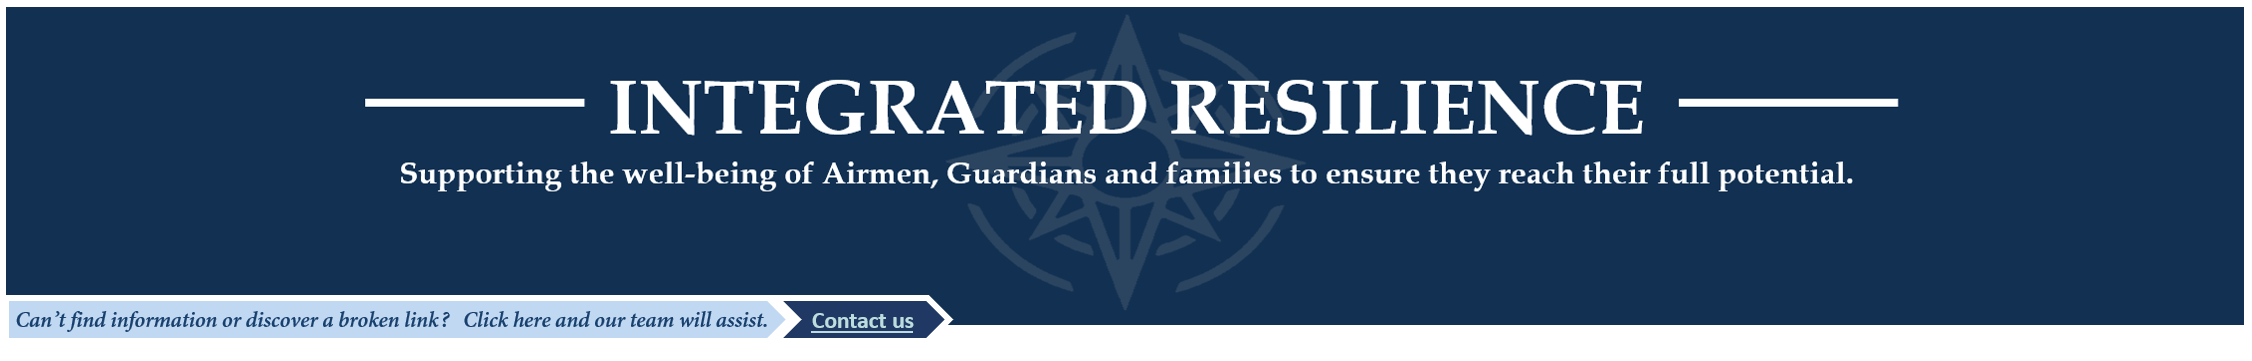 Home page banner for DAF Integrated Resilience-supporting well being of Airmen, Guardians and families..  Click here if having trouble finding information on site.